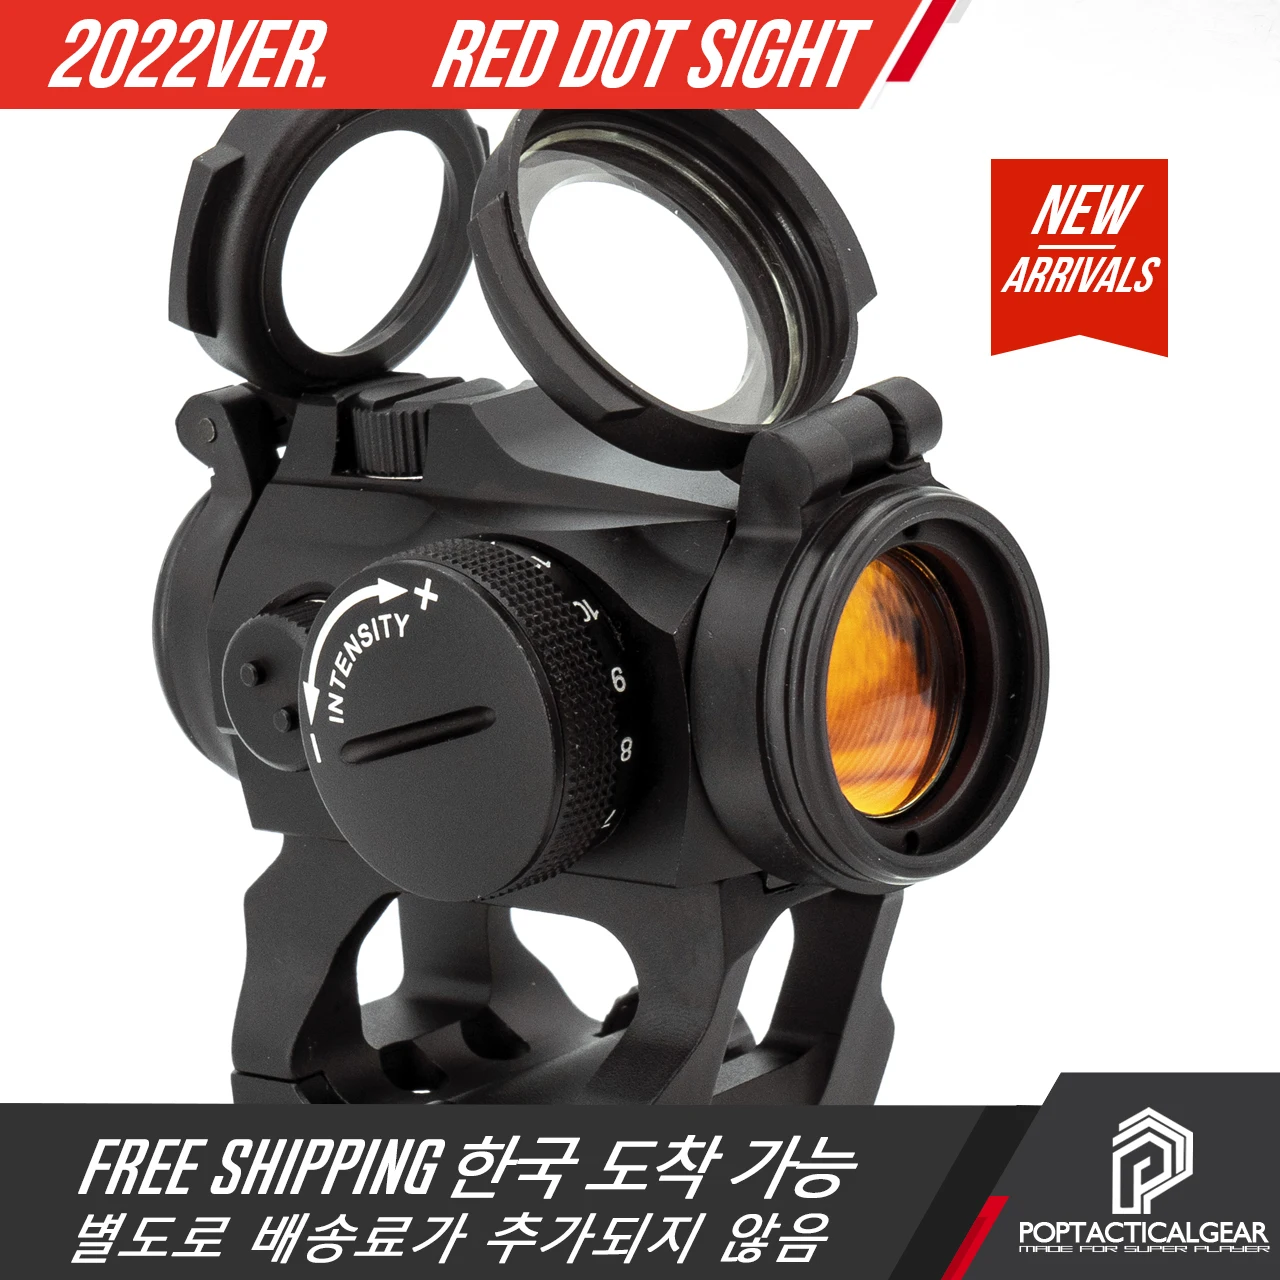 New 2022Ver 1X22 Red Dot Reflex Optic Sight For Hunting Airsoft Rifle With 1.54 1.93 2.26 Inch Mount Full Original Markings